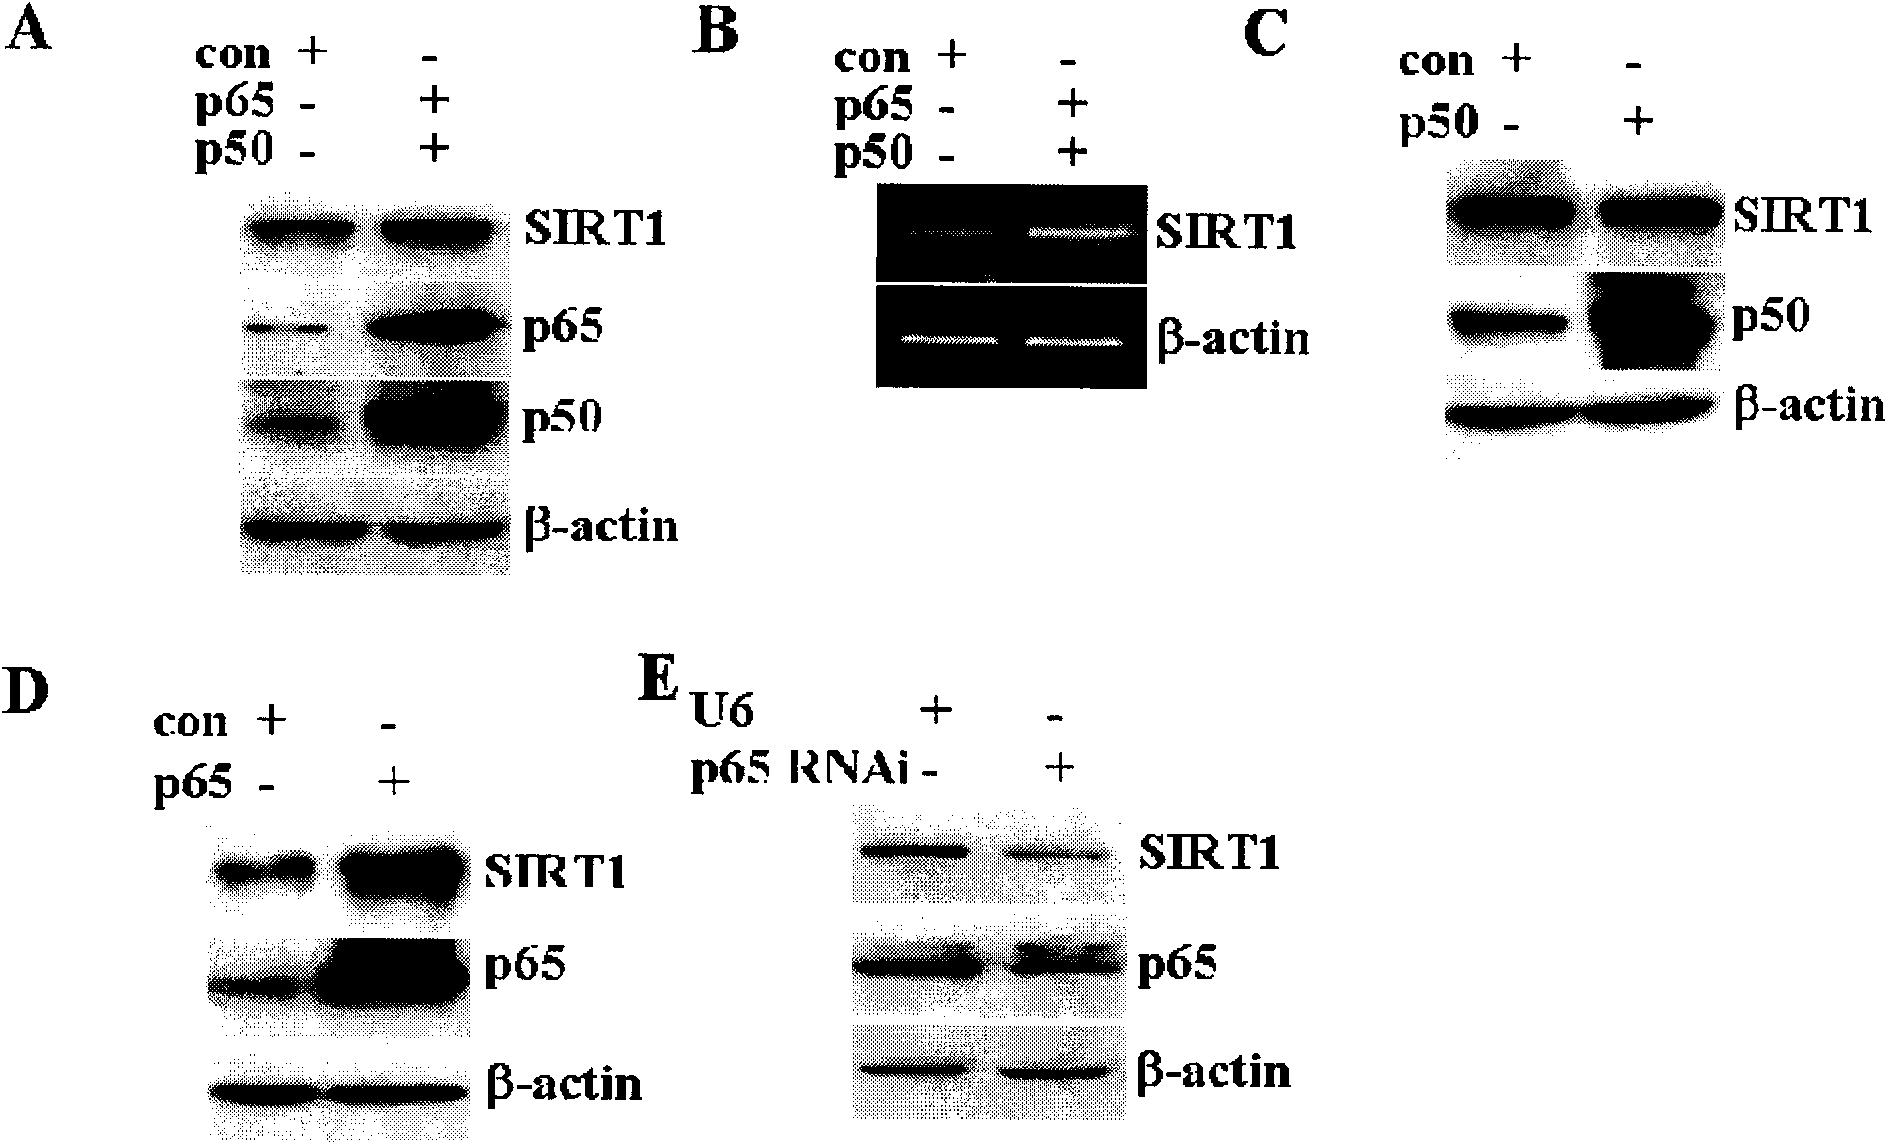 Application of p65 in preparation of medicament for up-regulating SIRT1 expression